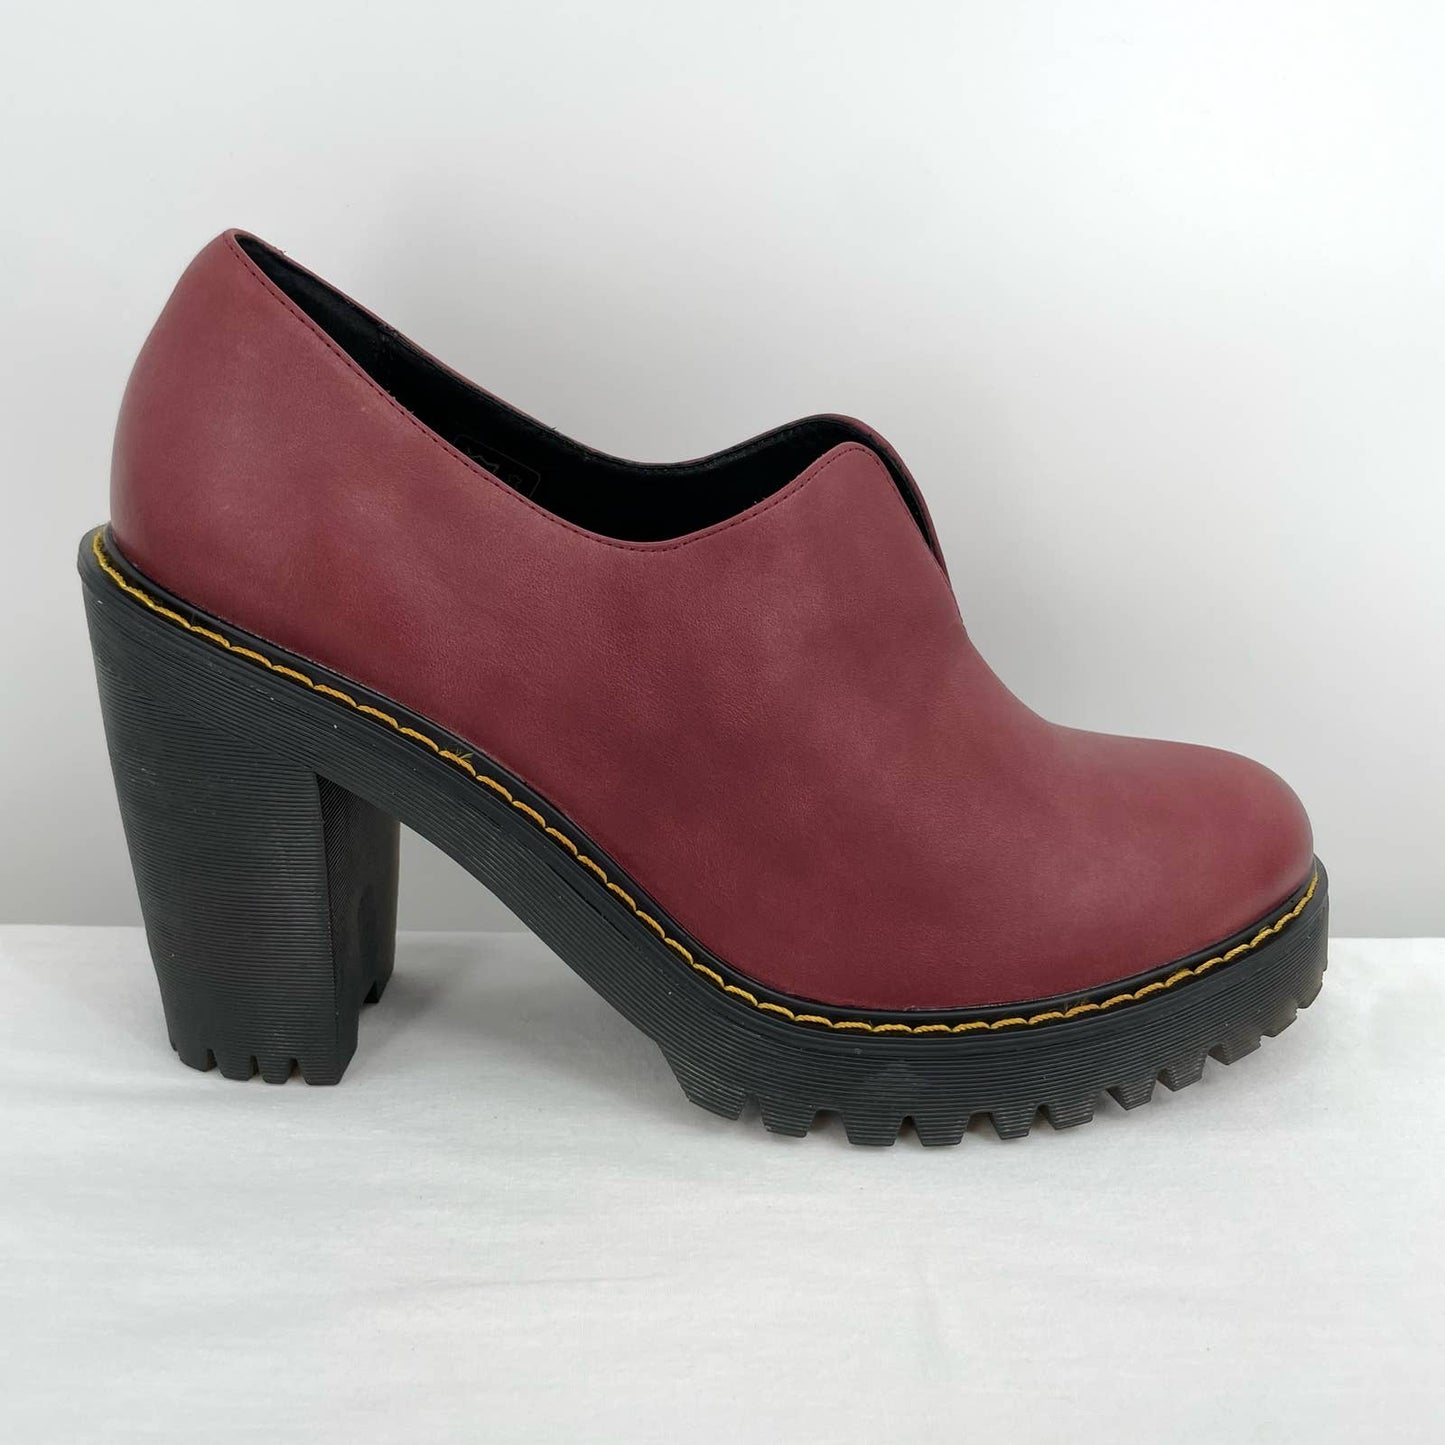 Dr. Martens Cordelia Wine Red Maroon Leather Chunky High Heeled Pumps Shoes Size 11